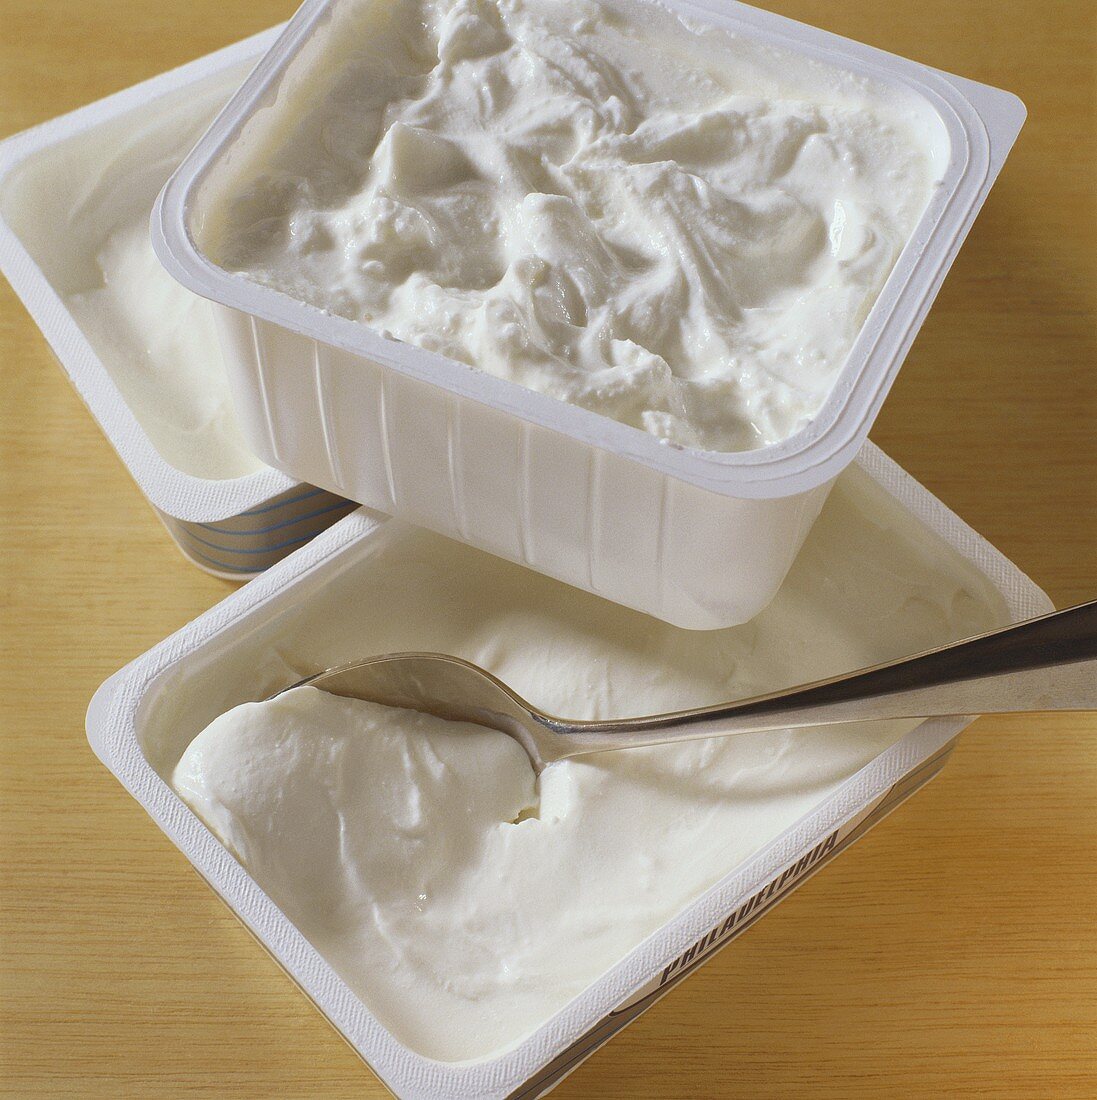 Soft (fresh) cheese and quark in opened packaging